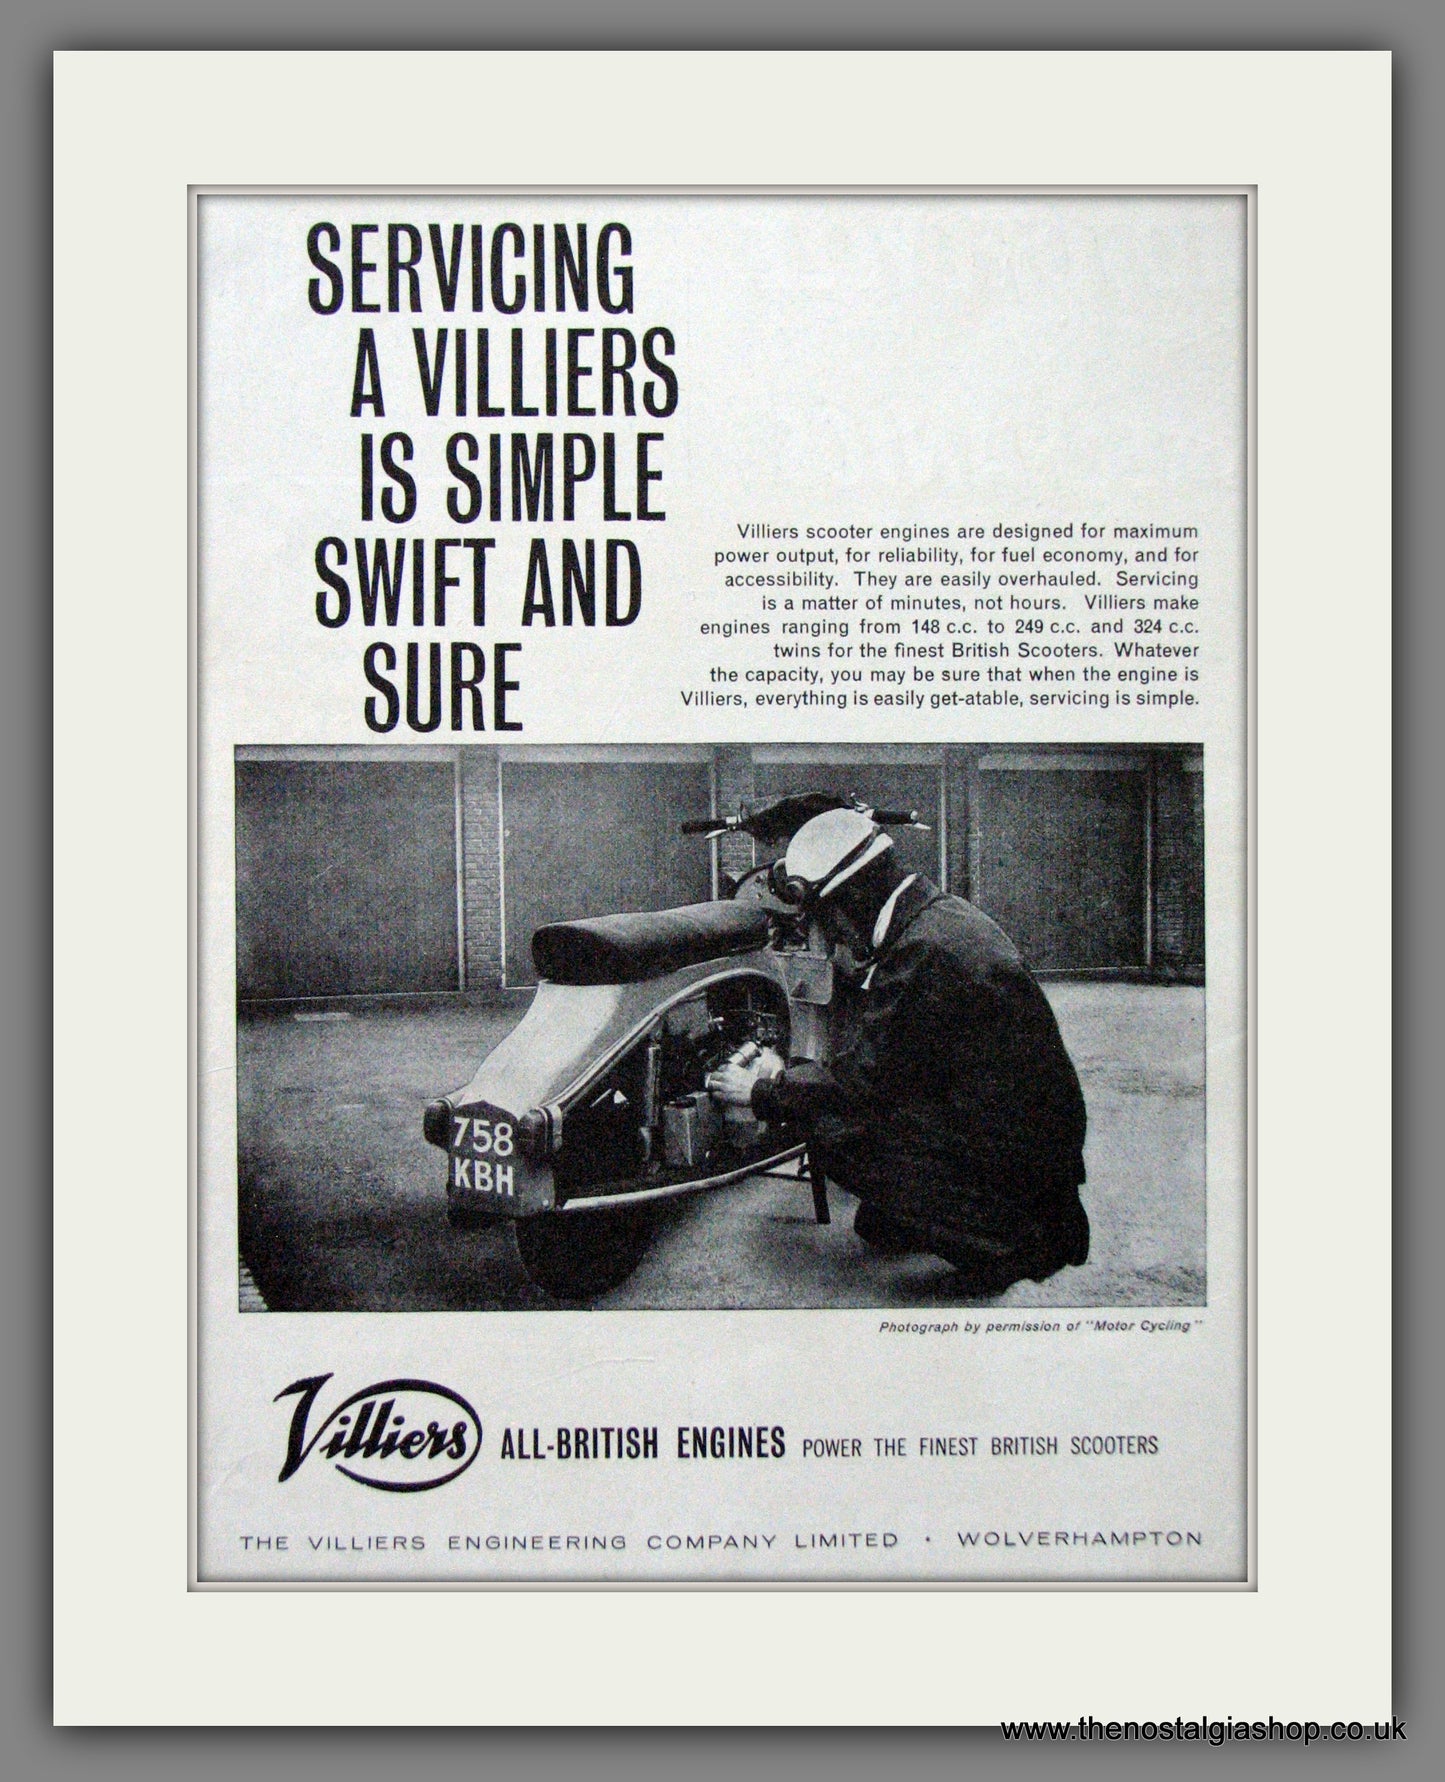 Villiers Engines for British Scooters. Original Advert 1961 (ref AD54224)